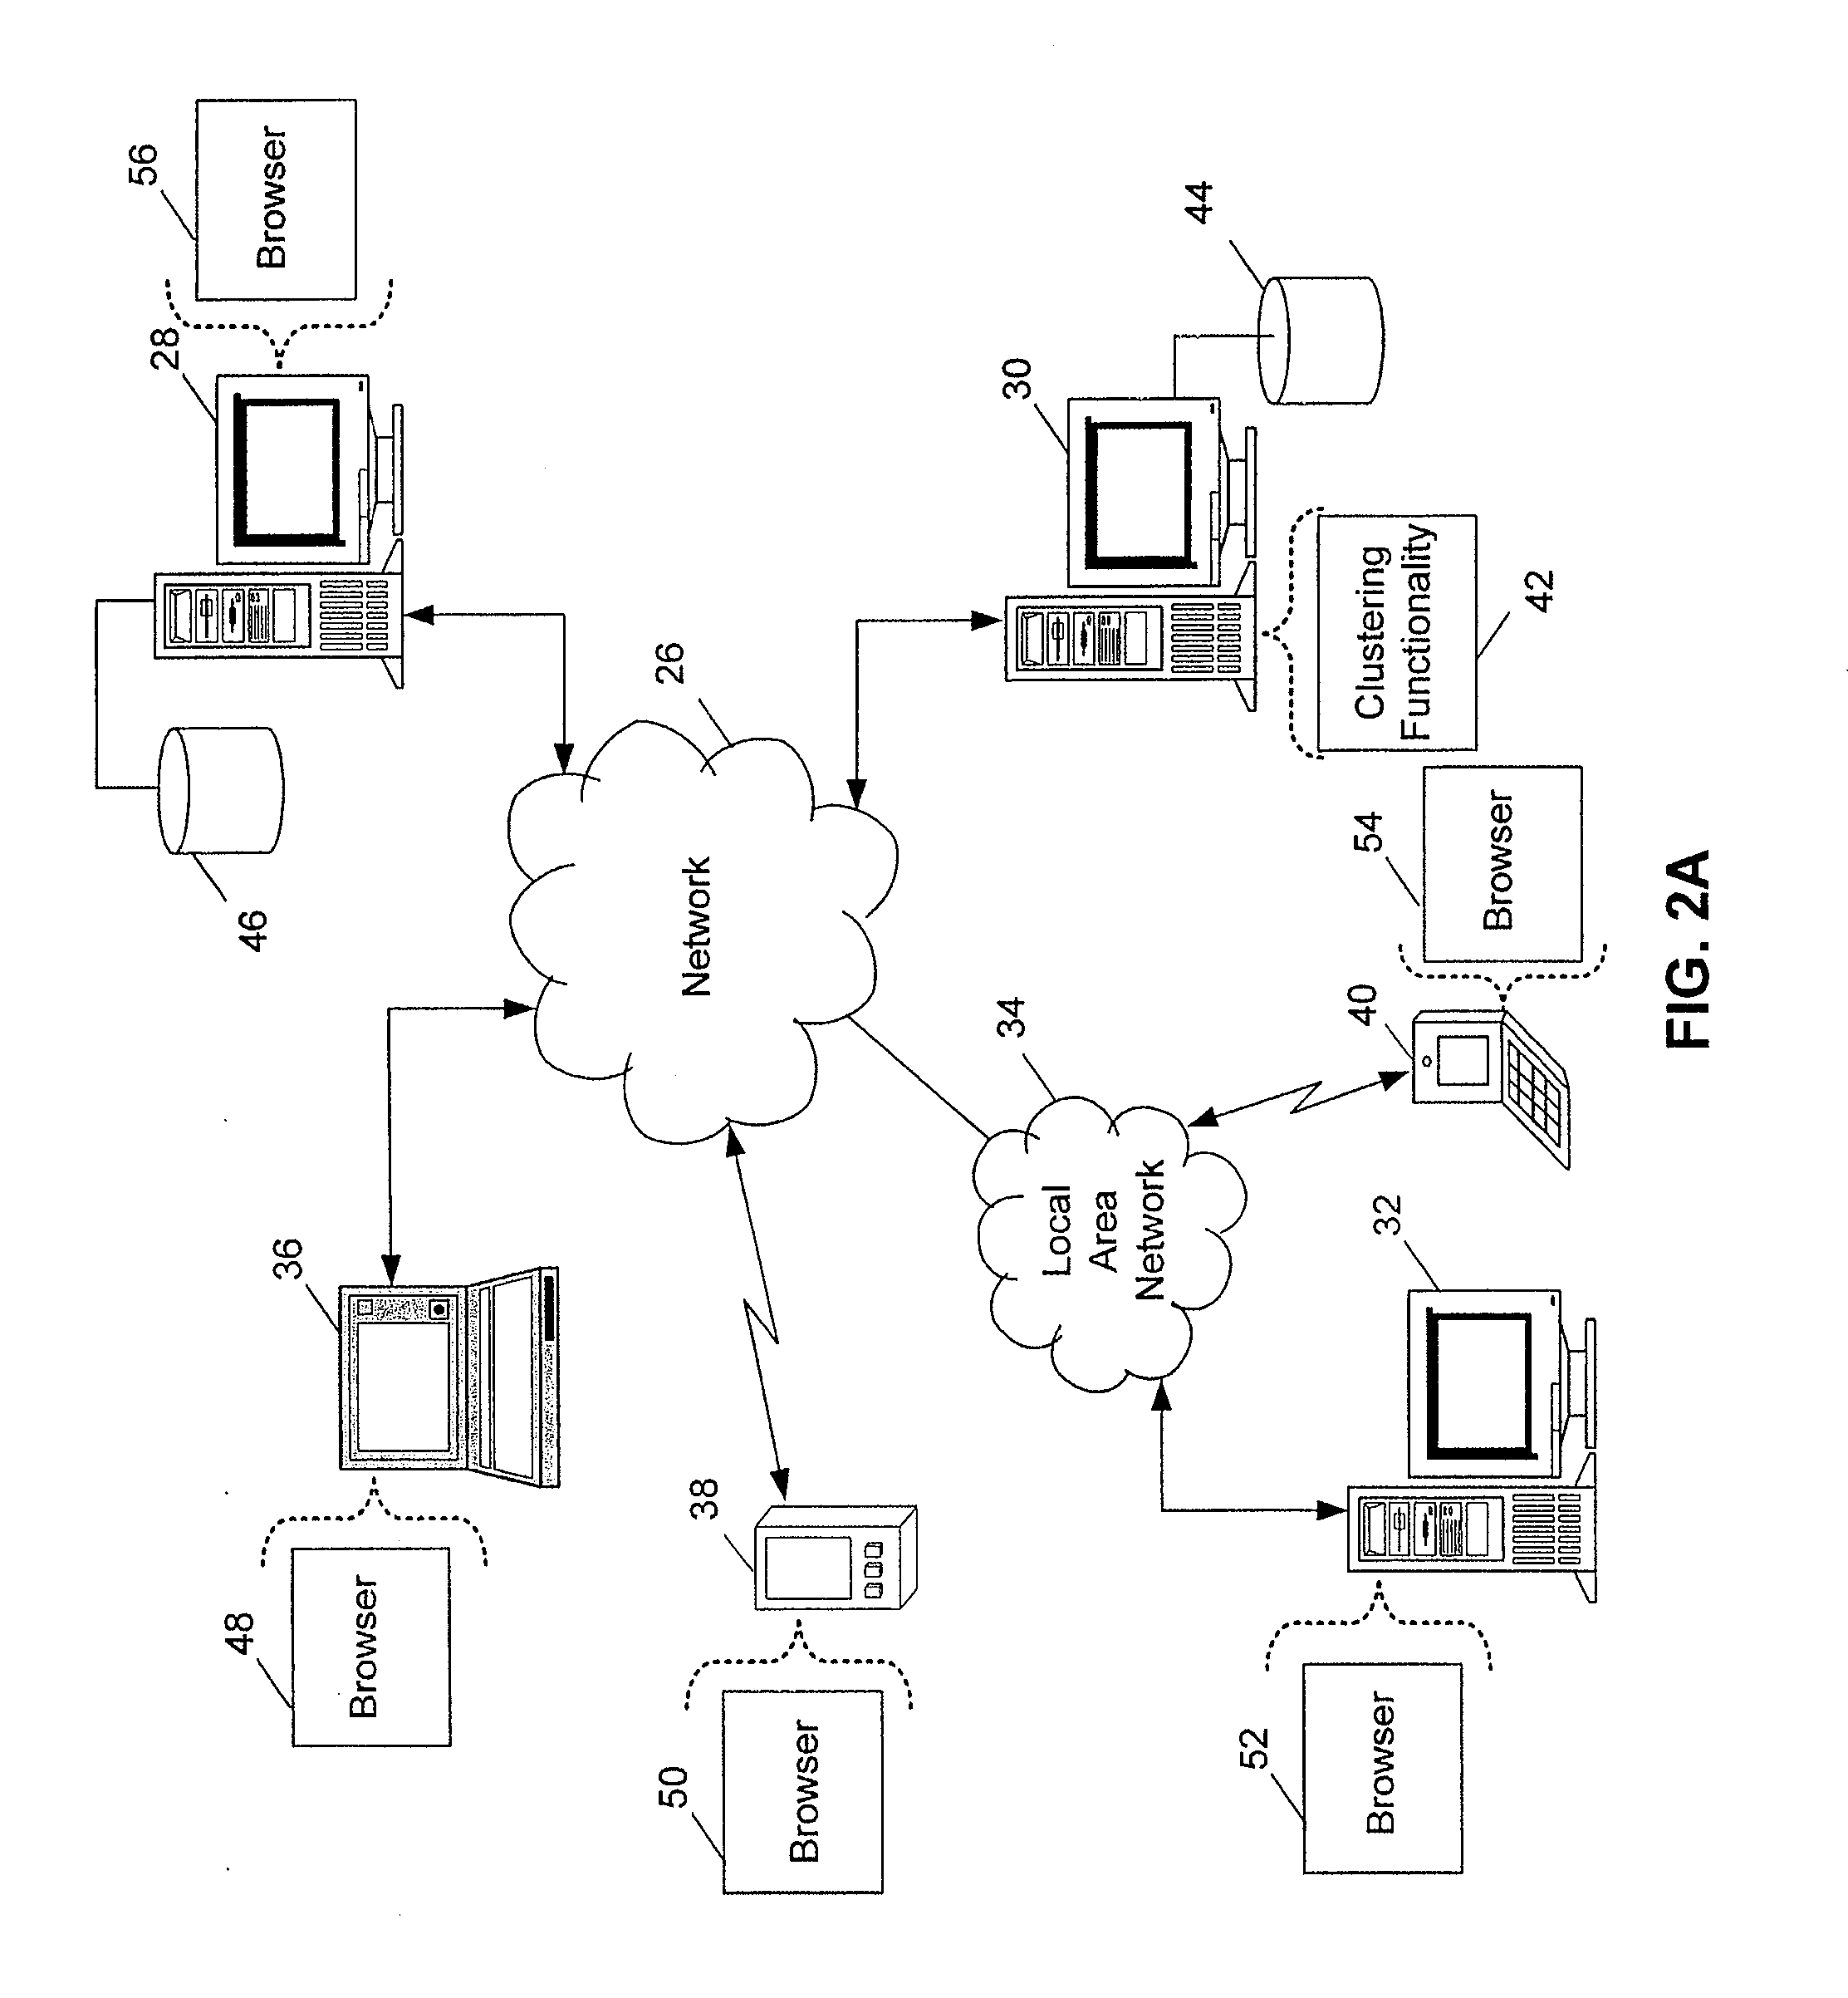 User Interface in Automated Scheduling System